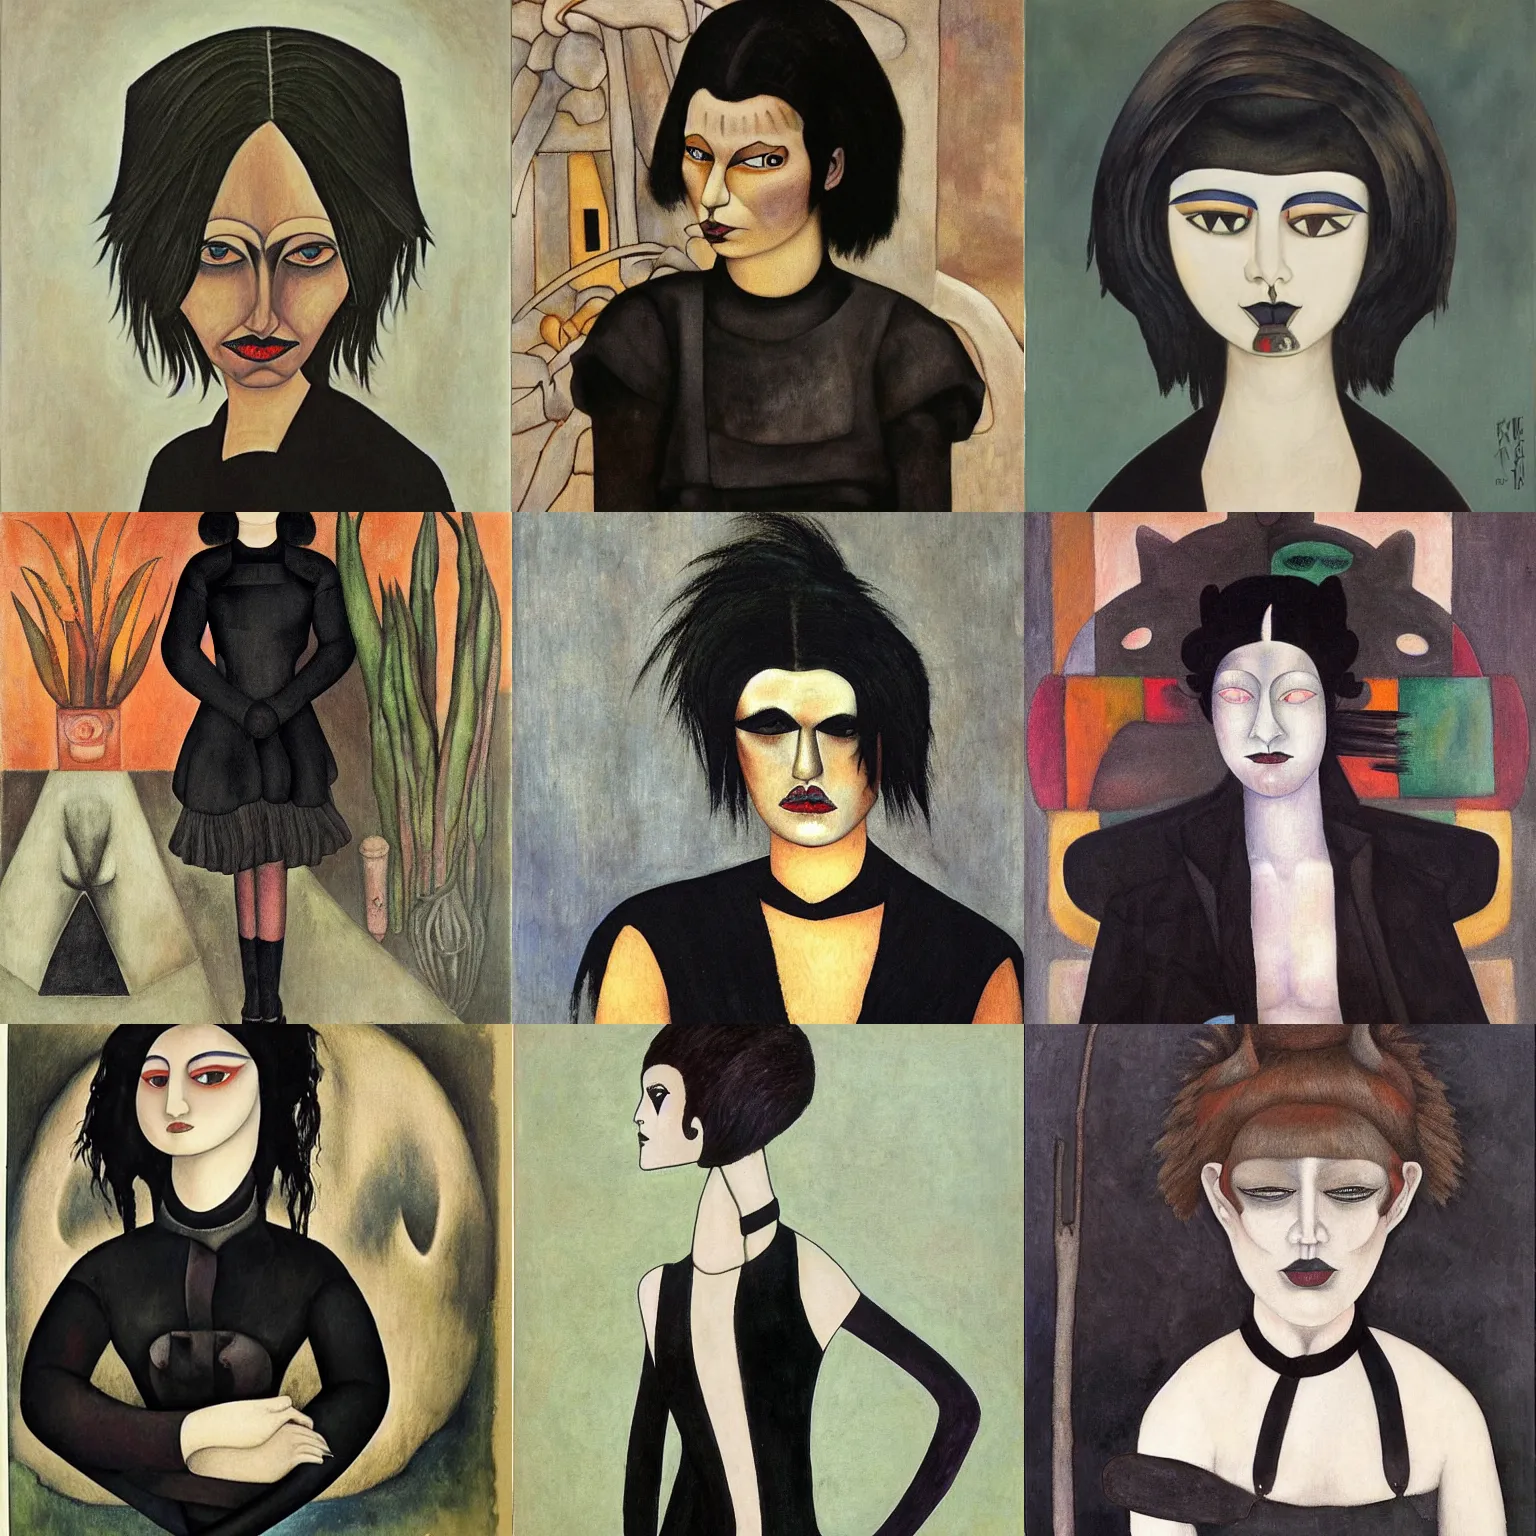 Prompt: A goth painted by Diego Rivera. Her hair is dark brown and cut into a short, messy pixie cut. She has a slightly rounded face, with a pointed chin, large entirely-black eyes, and a small nose. She is wearing a black tank top, a black leather jacket, a black knee-length skirt, a black choker, and black leather boots.